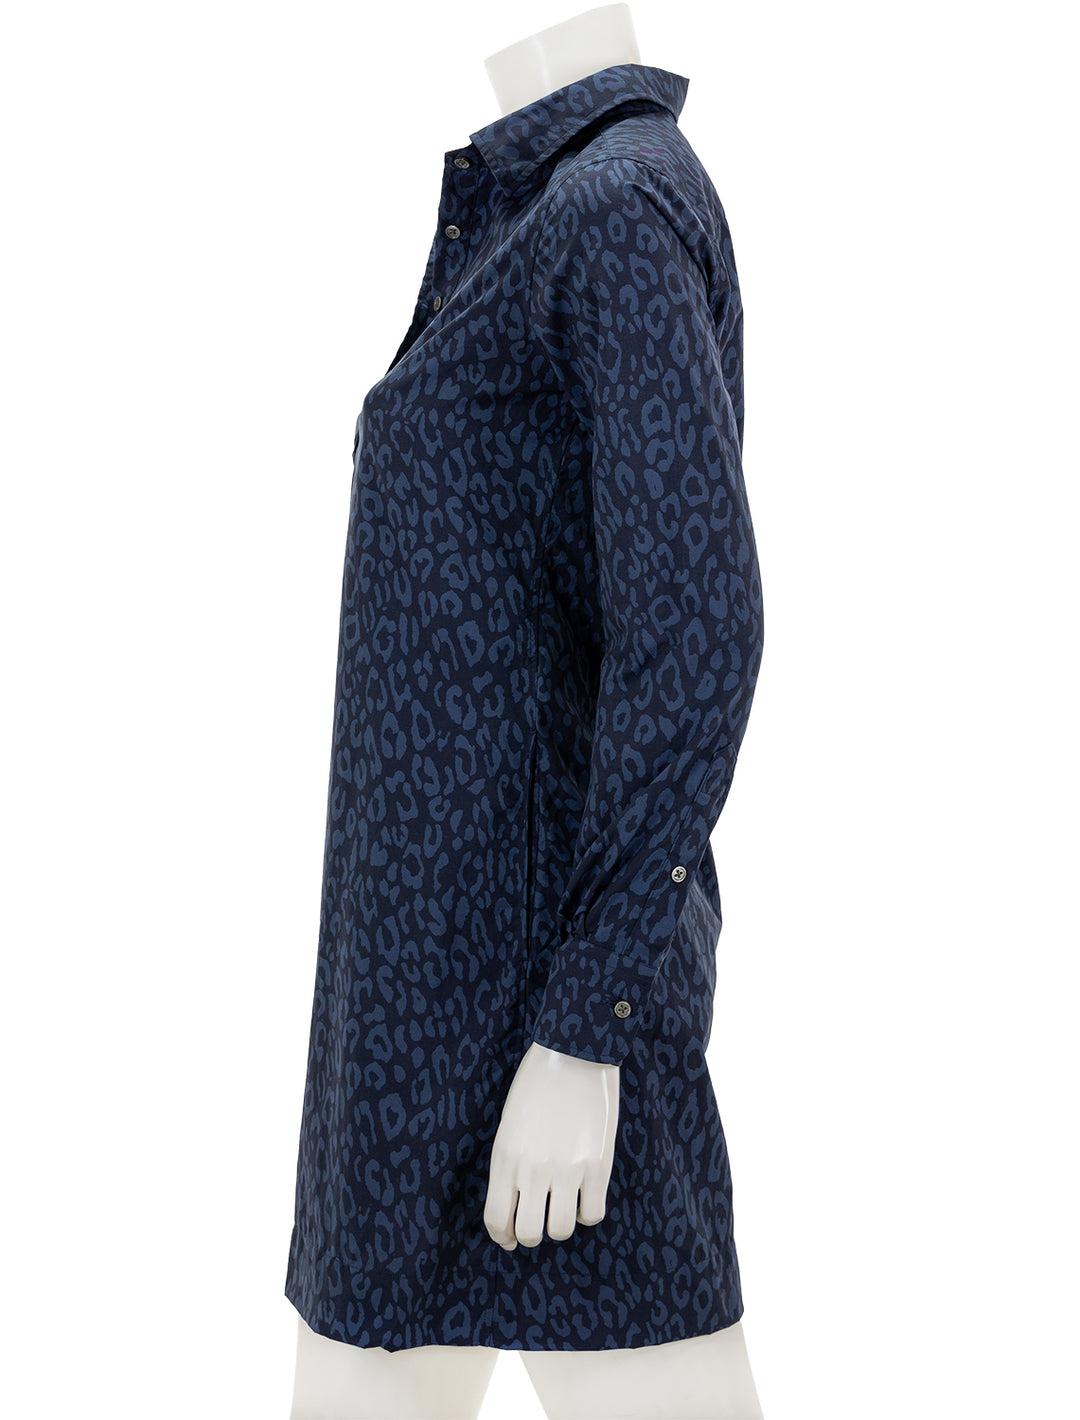 Side view of Ann Mashburn's long sleeve popover dress in blue and navy leopard.